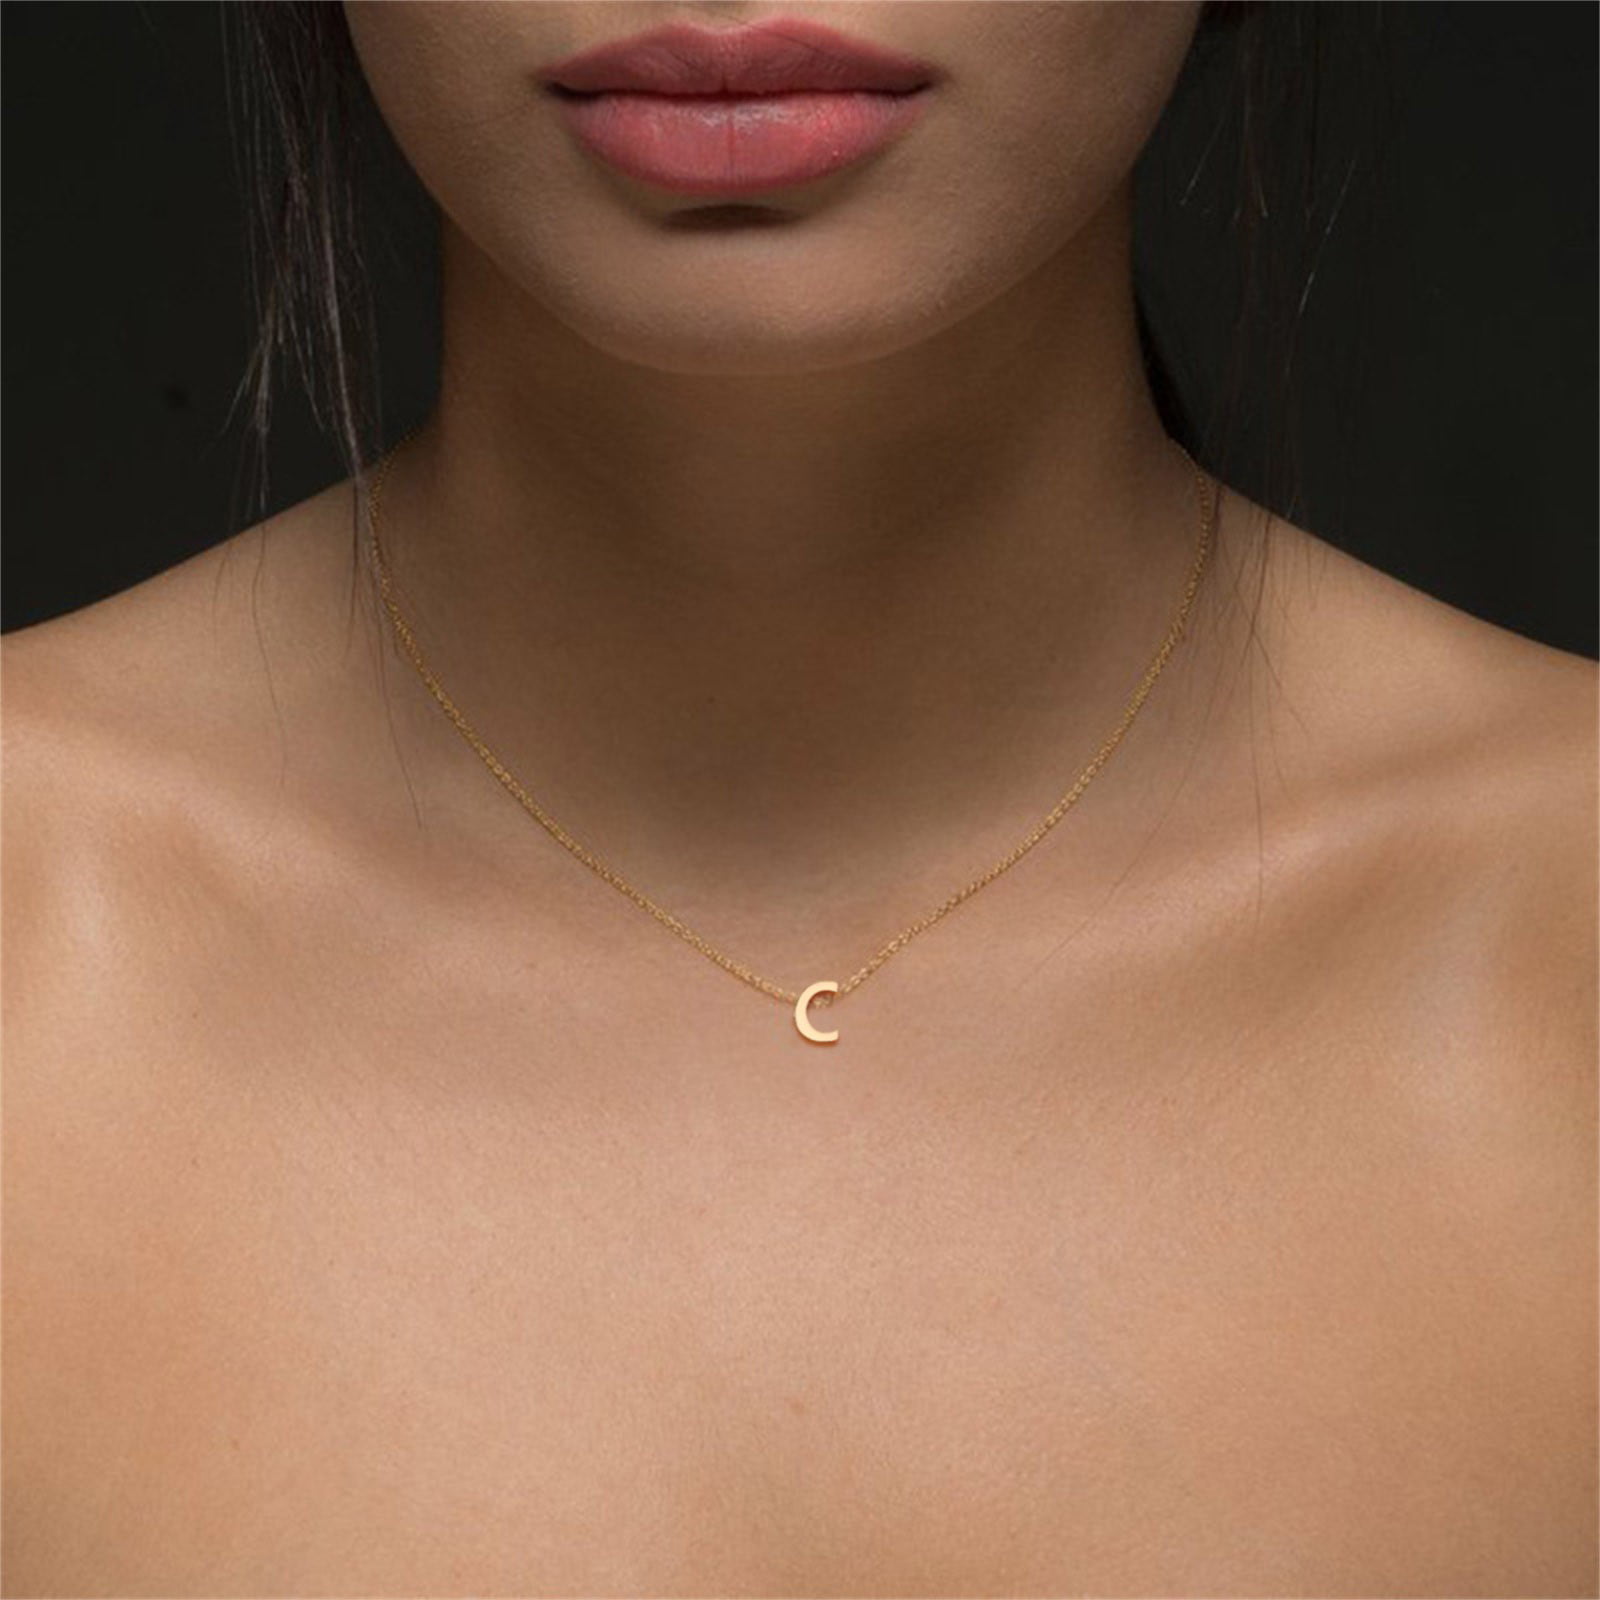 Gold Layered Necklaces Set, Layered Disk Necklaces, Ball Chain Necklace,  Everyday Layering Necklace, Delicate Gold Necklace, 14k Goldfilled - Etsy